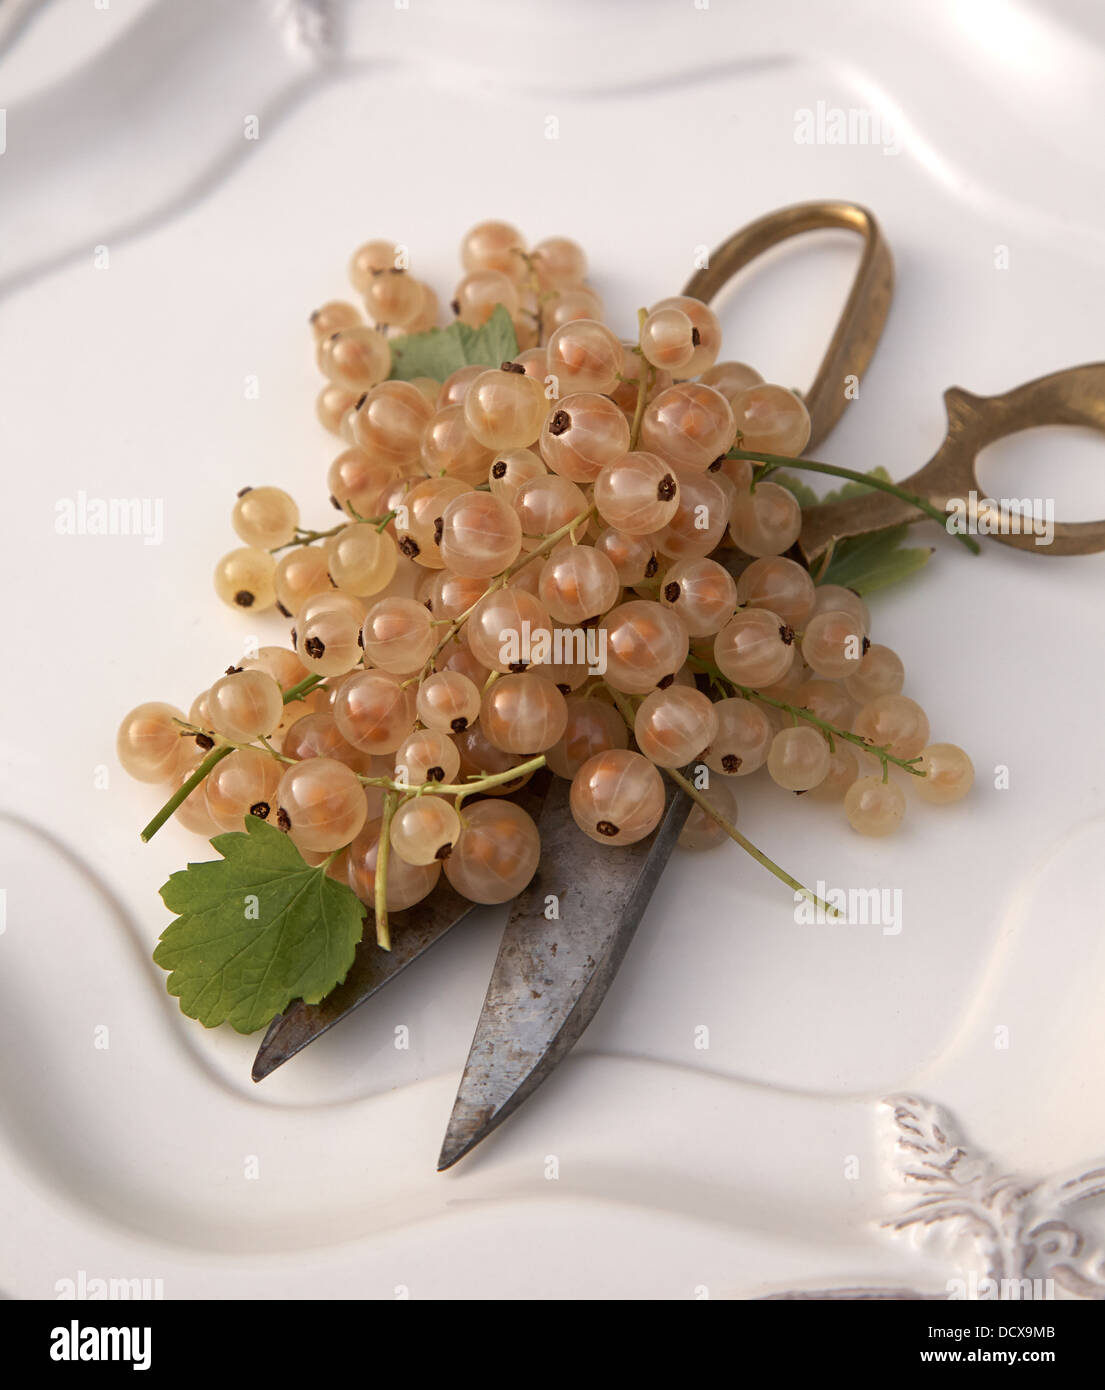 white currants on scissors on a white plate Stock Photo